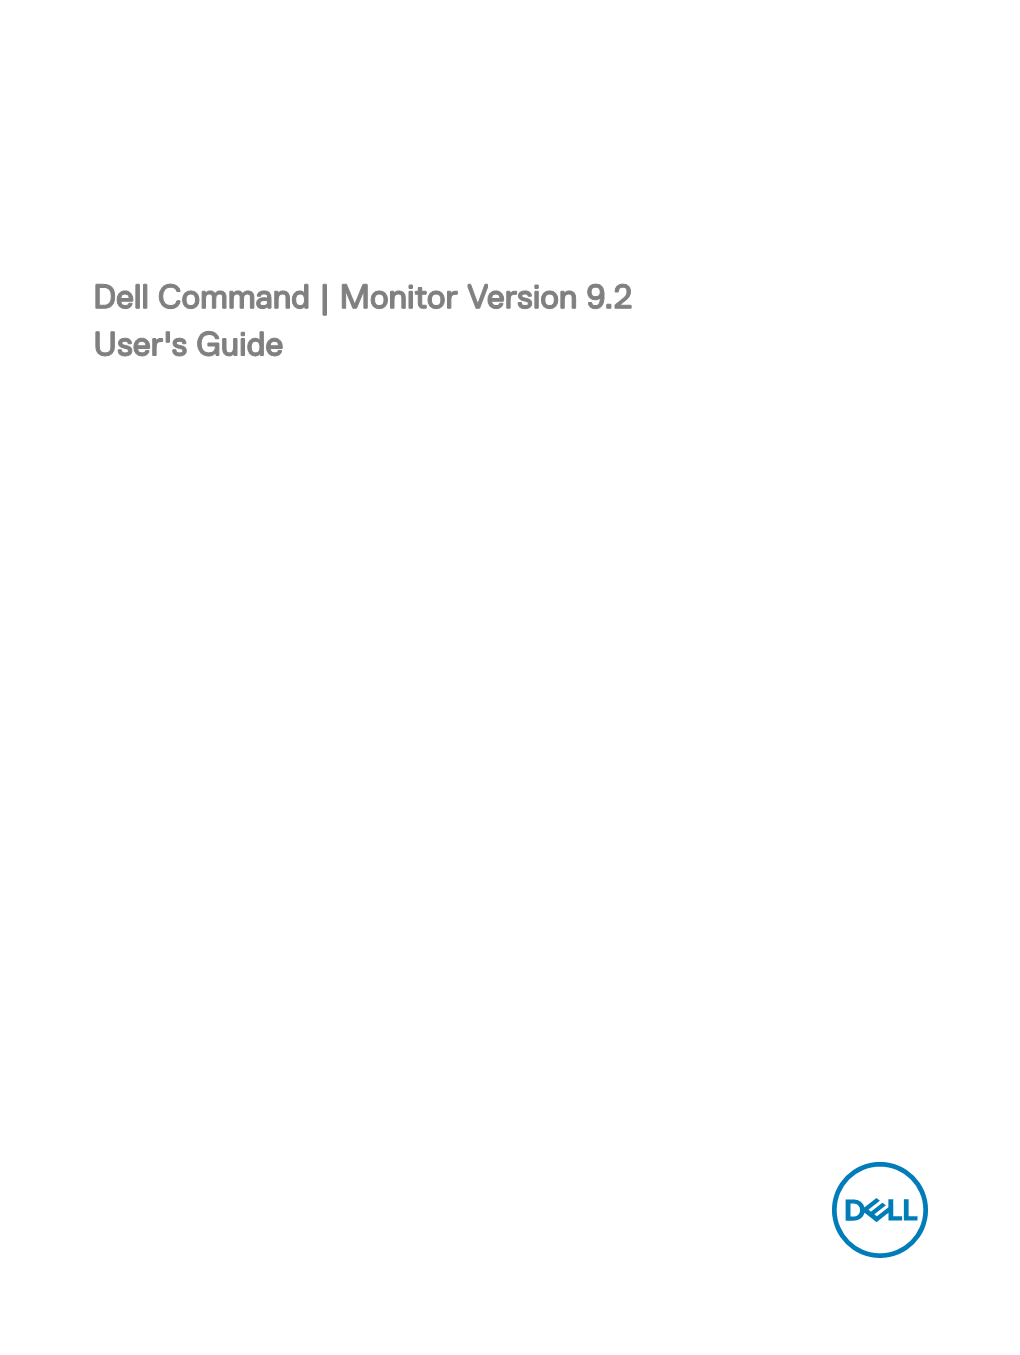 Dell Command | Monitor Version 9.2 User's Guide Notes, Cautions, and Warnings